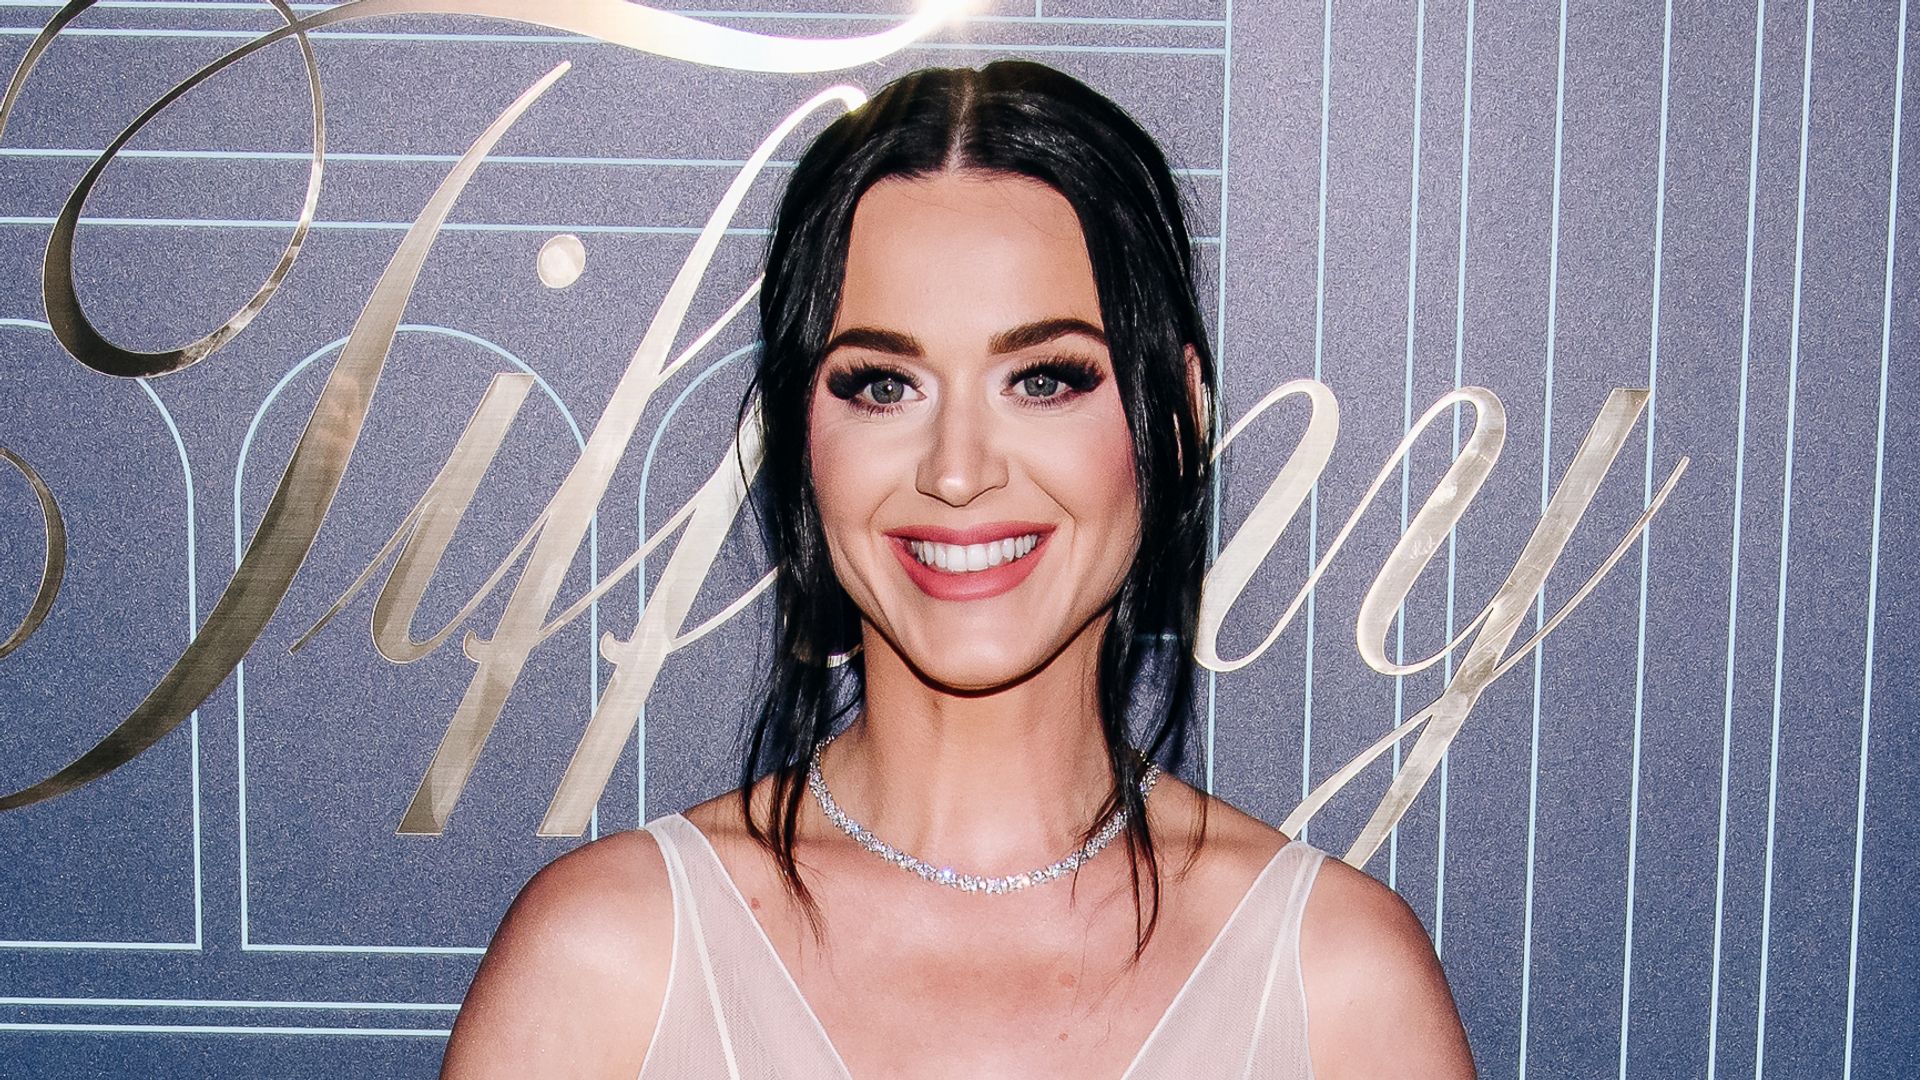 Katy Perry at the grand-reopening of the Landmark, Tiffany & Co.'s flagship store, held at Tiffany & Co. on April 27, 2023 in New York City.